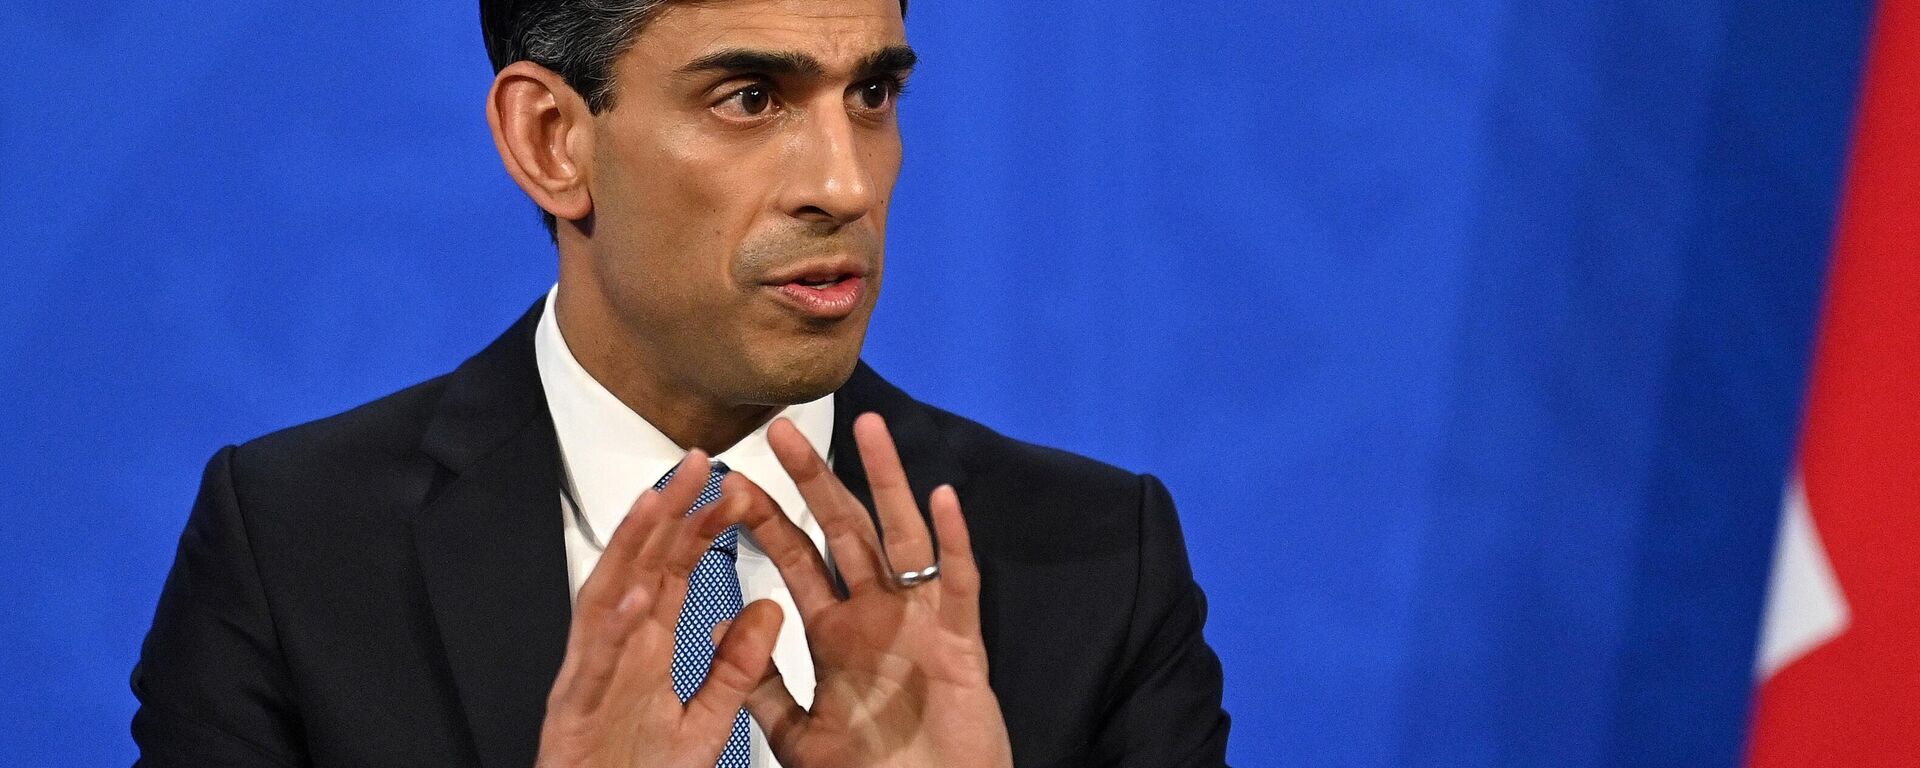 Britain's Chancellor of the Exchequer Rishi Sunak hosts a press conference in the Downing Street Briefing Room on February 3, 2022 - Sputnik International, 1920, 29.07.2022